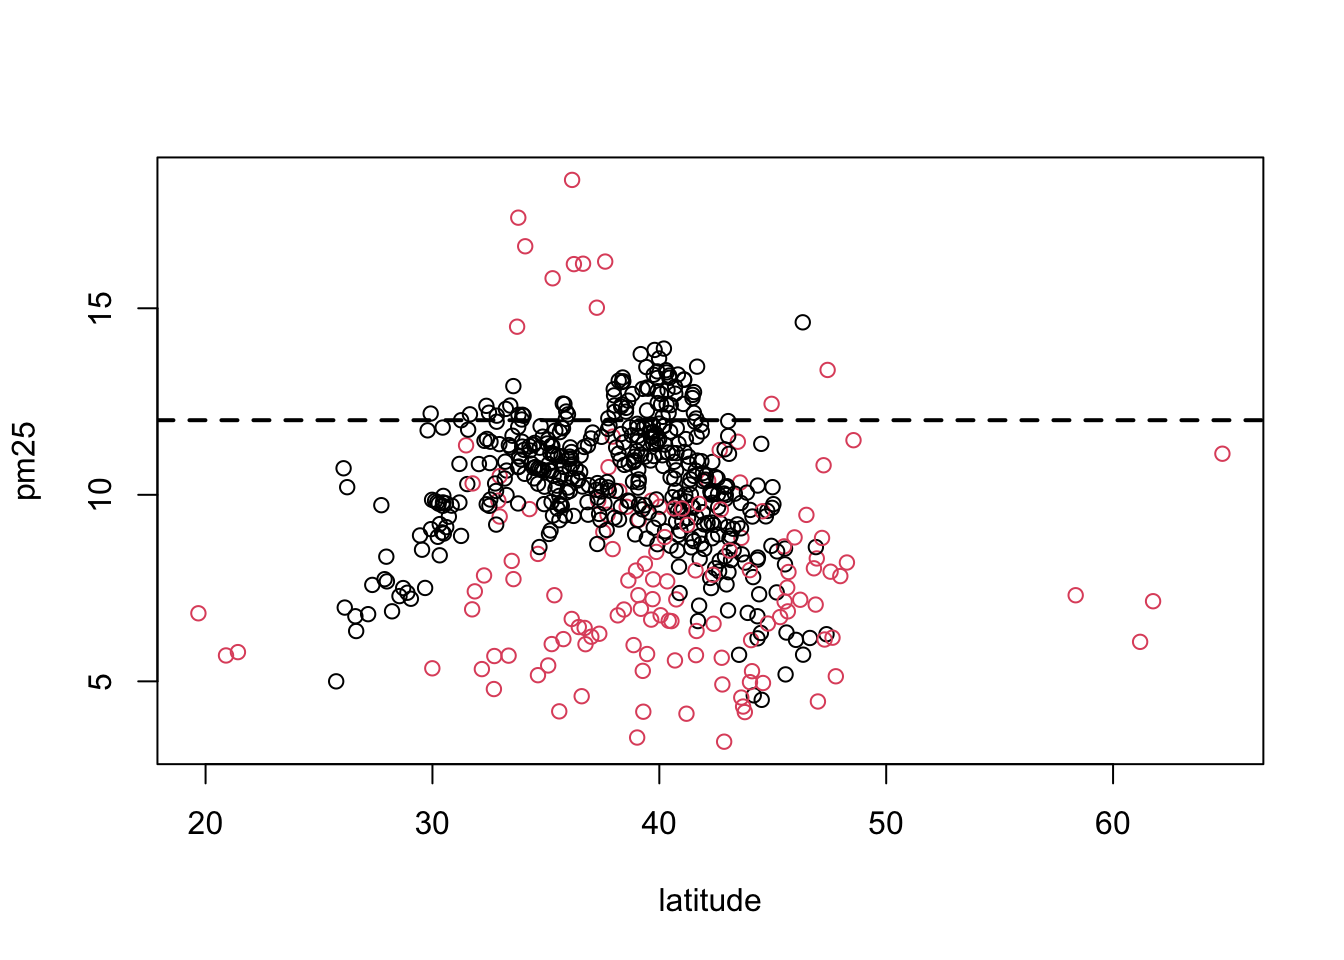 Scatterplot of PM2.5 and latitude by region